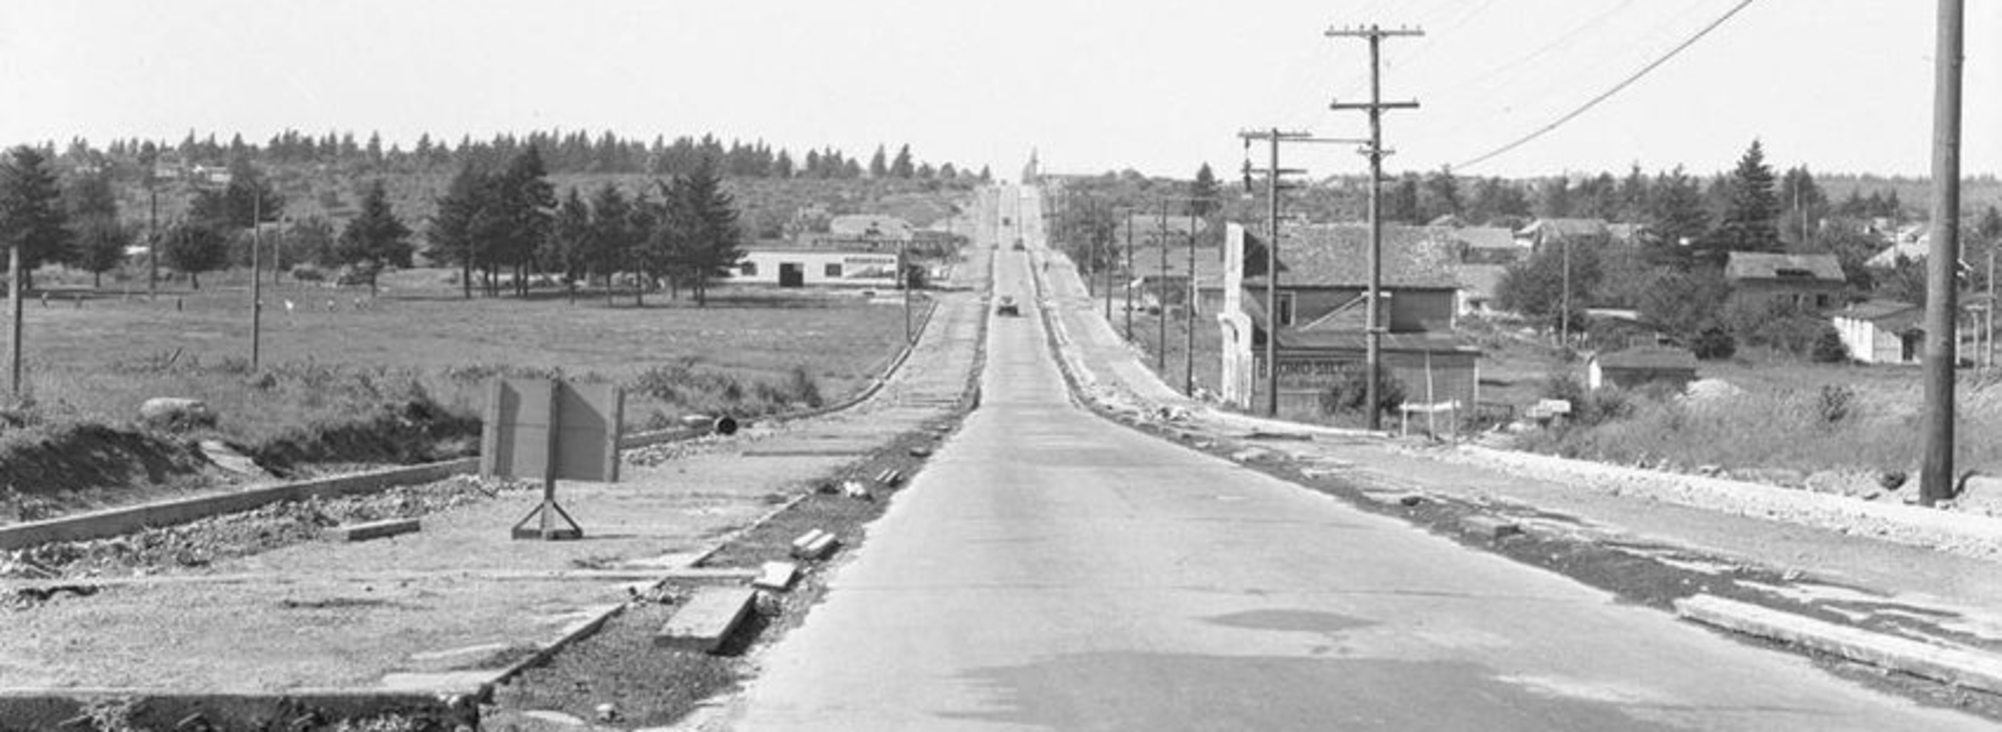 82nd Avenue in 1934, a desolate farm-to-market road, black and white